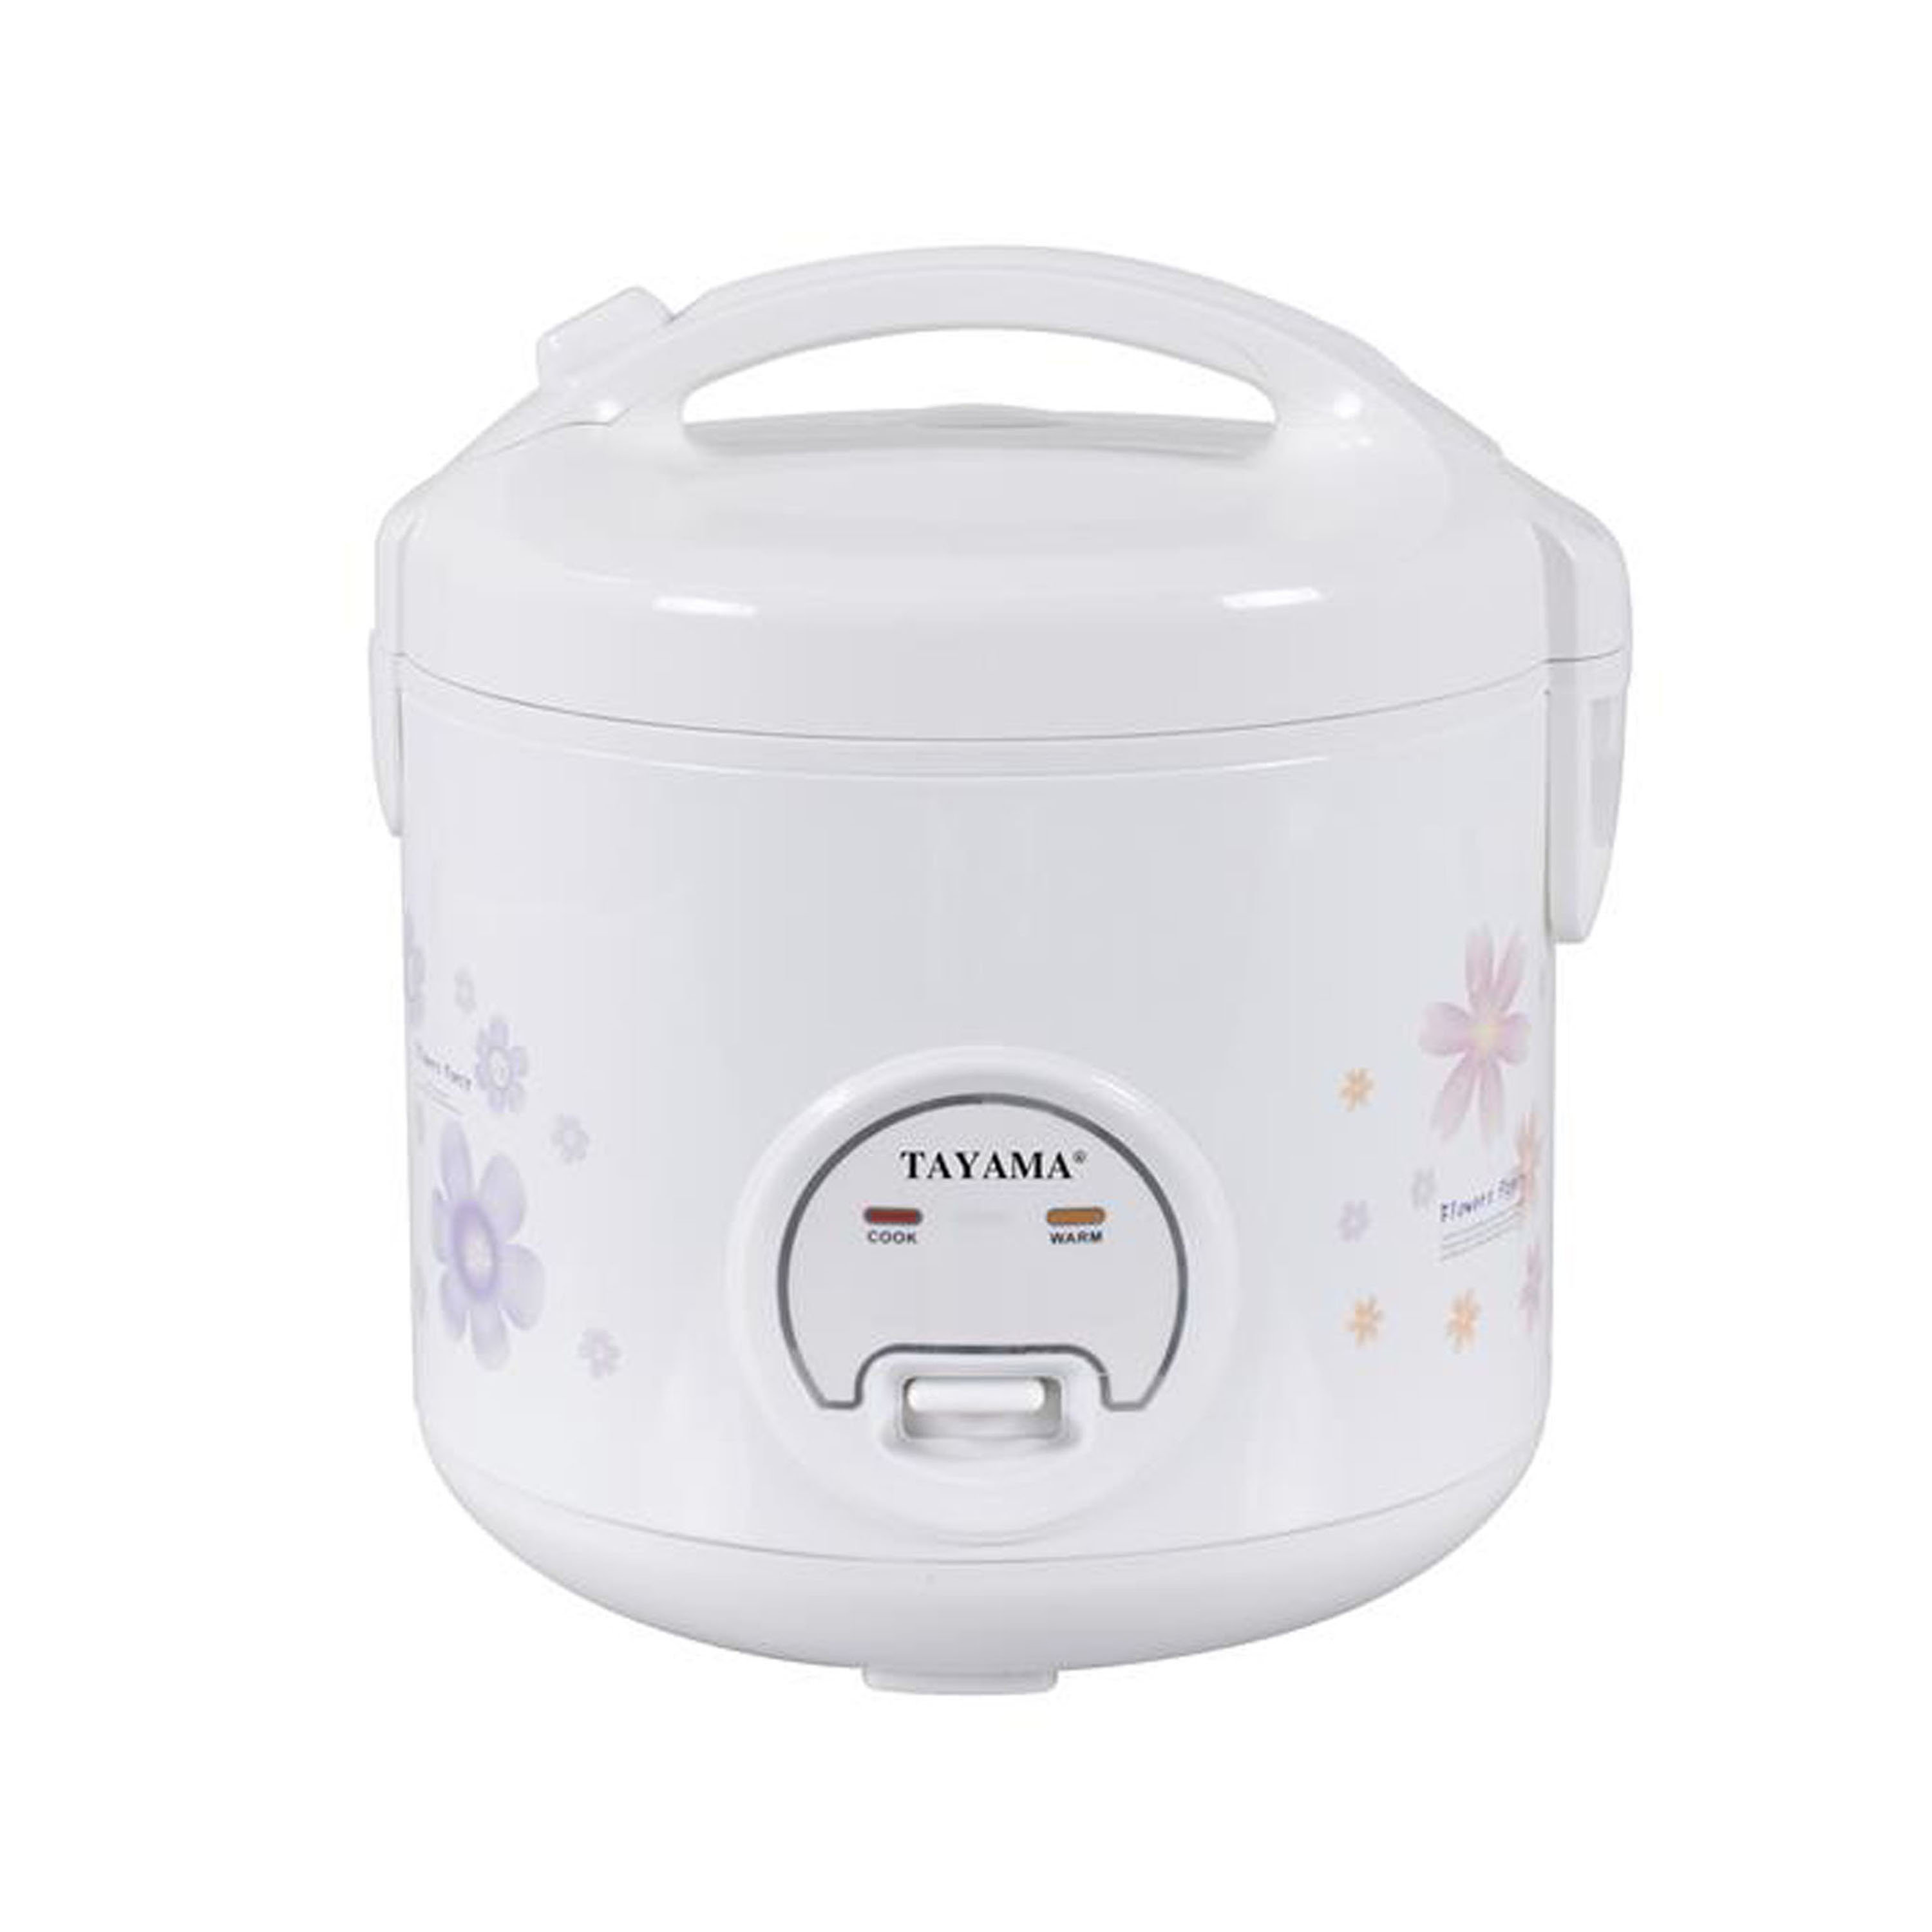 CHACEEF Mini Rice Cooker 2-Cups Uncooked, 1.2L Portable Non-Stick, Smart  Control Multifunction Small Travel Cooker with 24 Hours Timer Delay & Keep